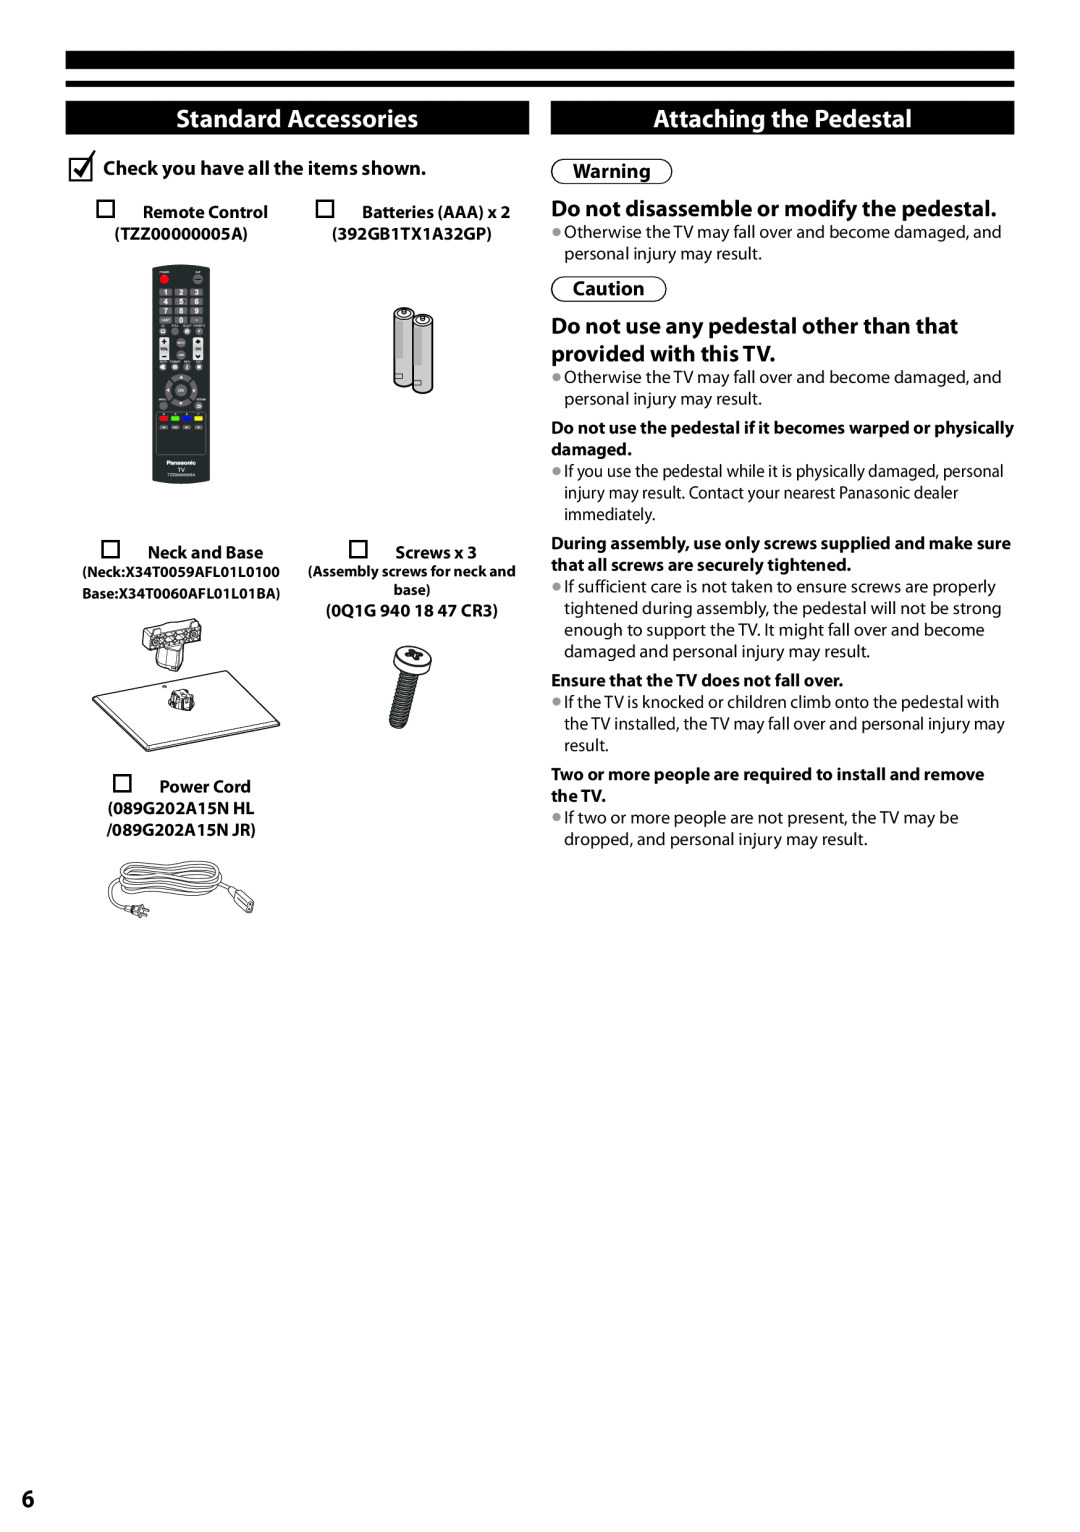 Panasonic TC-L24X5 owner manual Standard Accessories, Attaching the Pedestal, Do not disassemble or modify the pedestal 